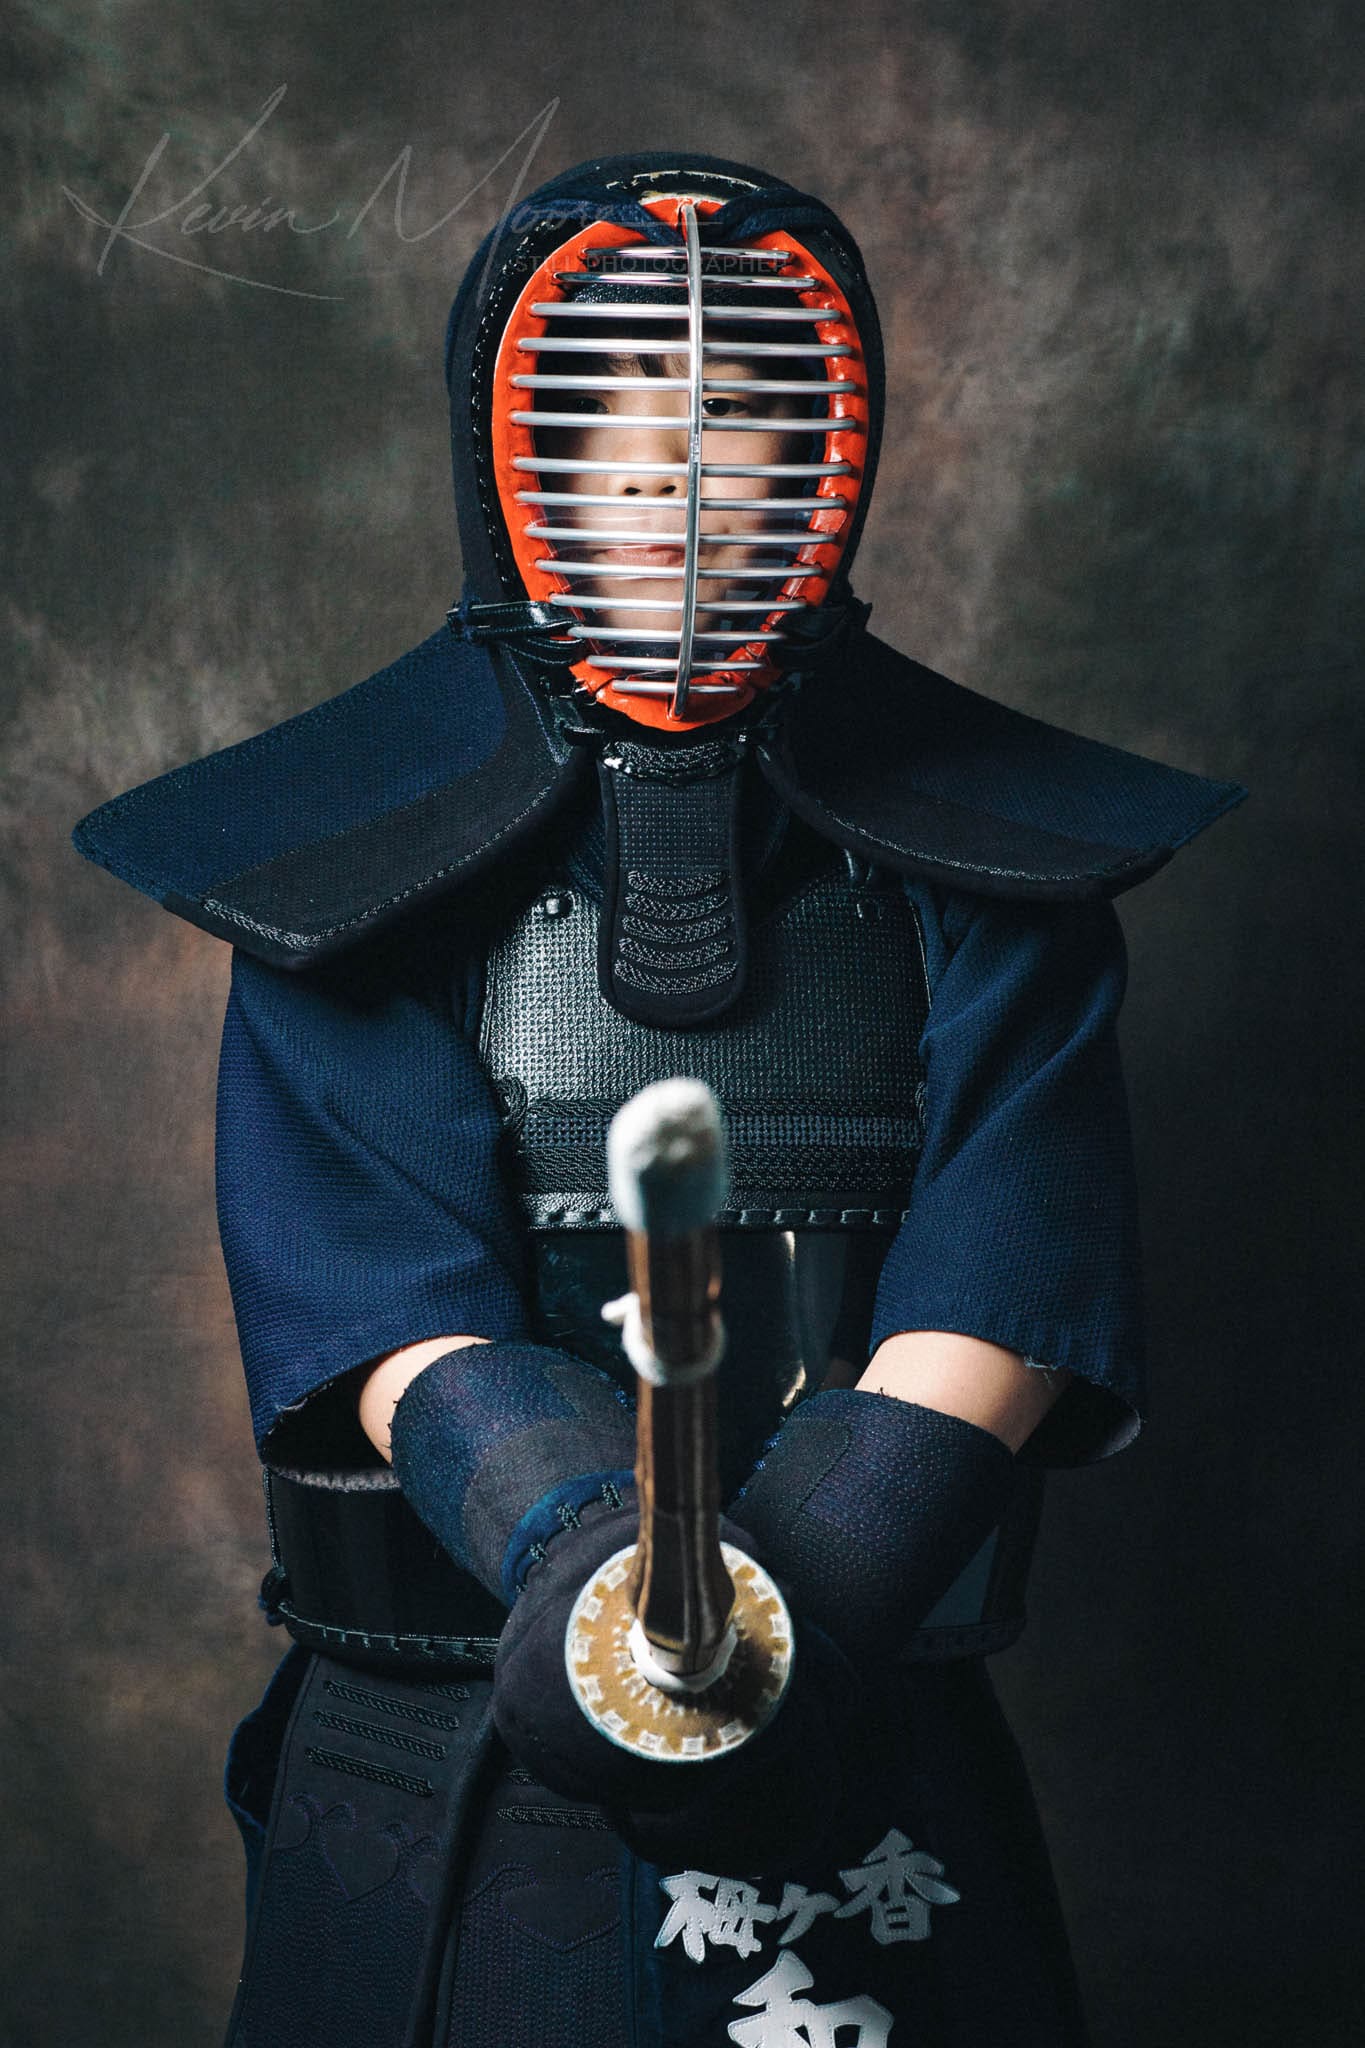 Kendo practitioner in traditional gear with bamboo sword, ready for combat.